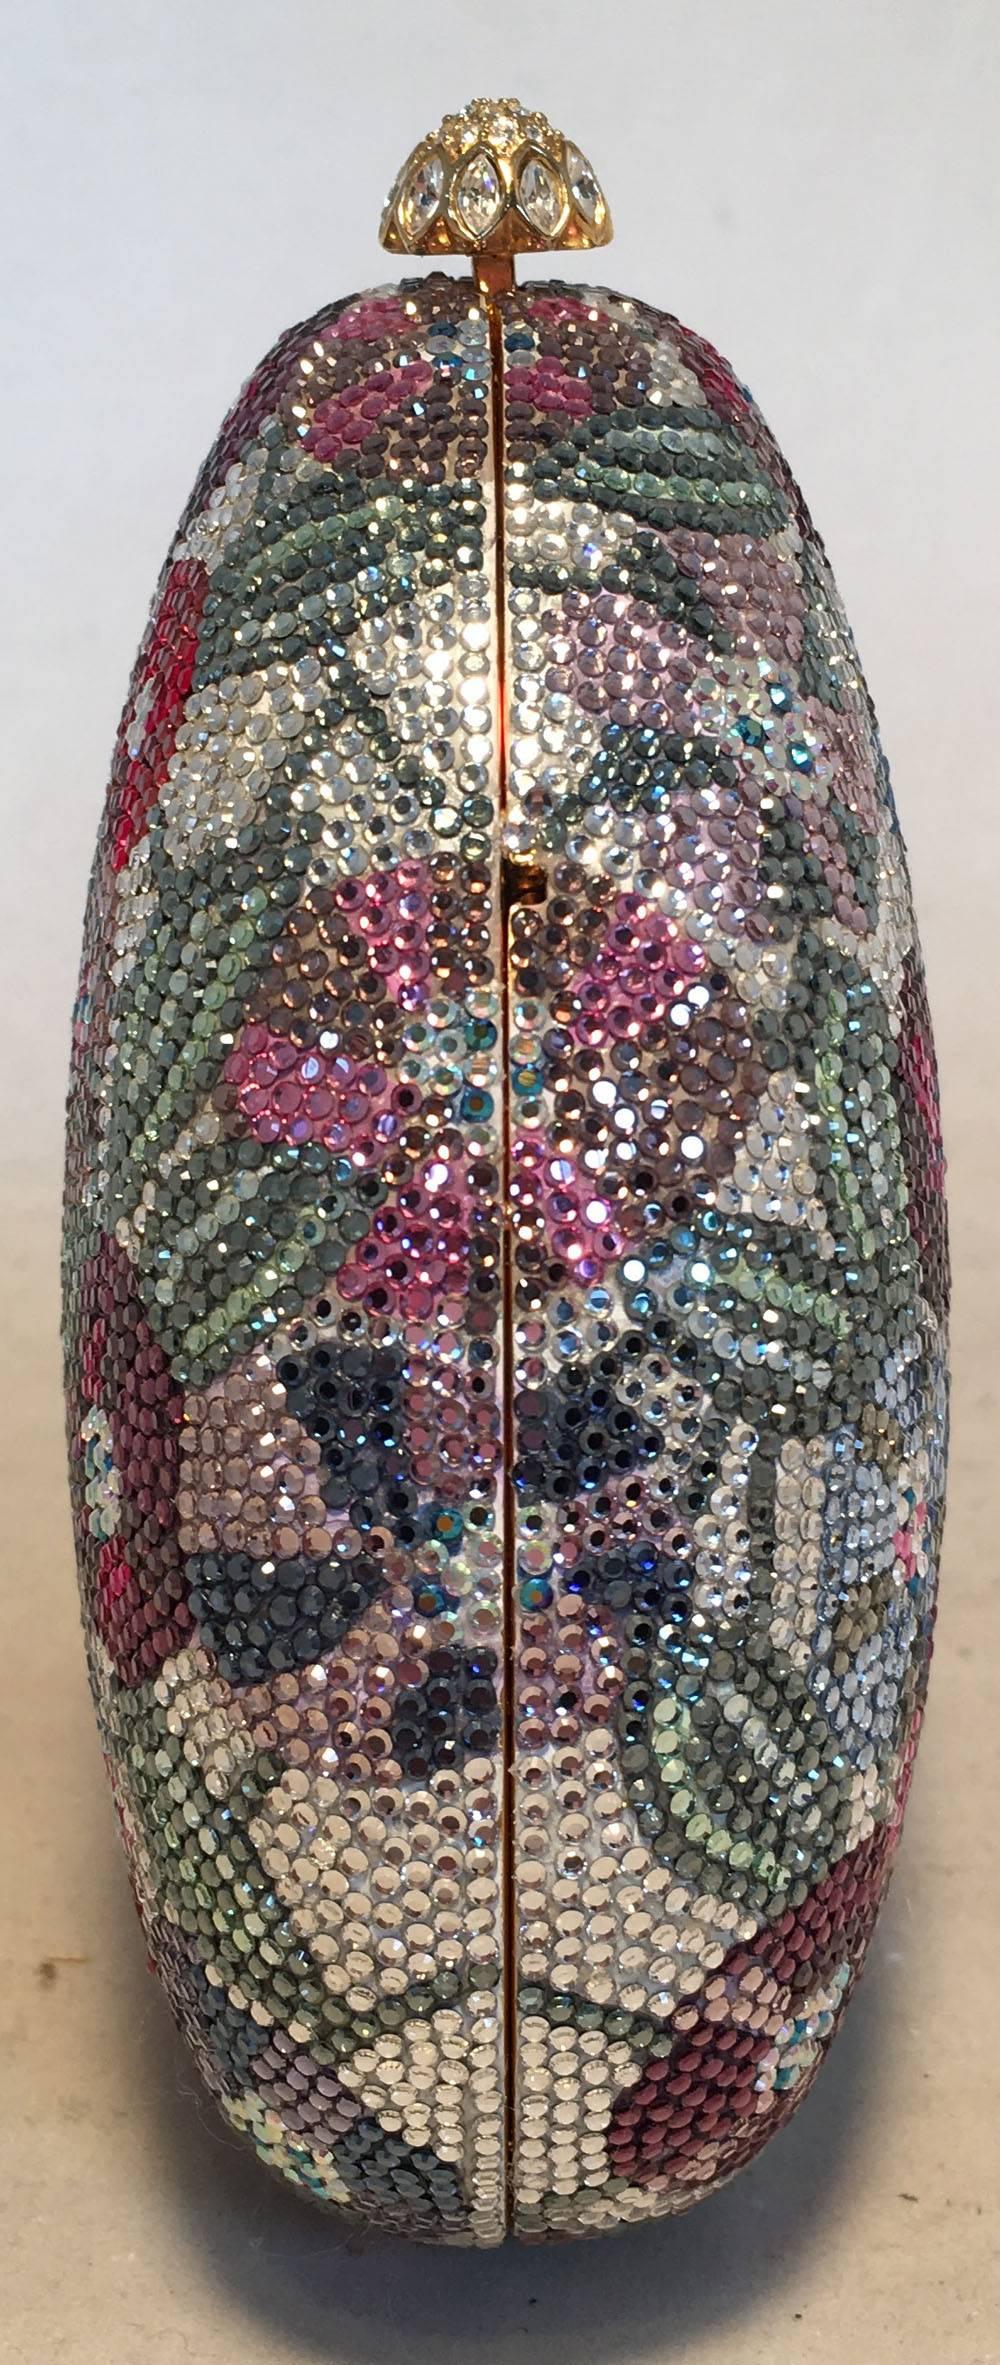 BEAUTIFUL Judith Leiber Swarovski Crystal floral print minaudiere in excellent condition. Teal Swarovski crystal background with multicolor floral print design throughout. Top crystal push button closure opens to a gold leather lined interior that